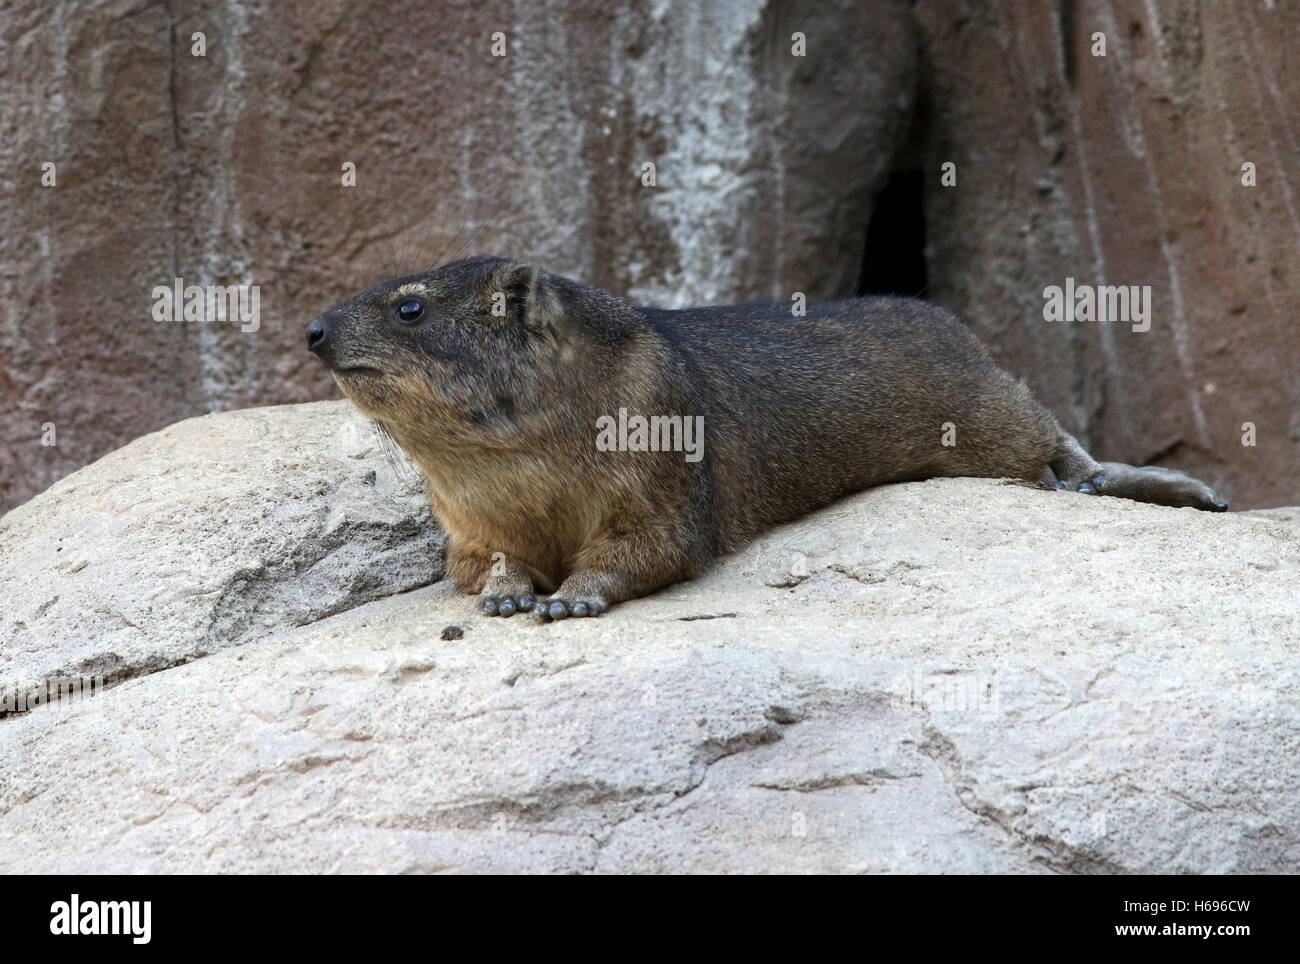 Resting male South African Cape or rock hyrax (Procavia capensis), a.k.a. Rock badger or 'Dassie' Stock Photo